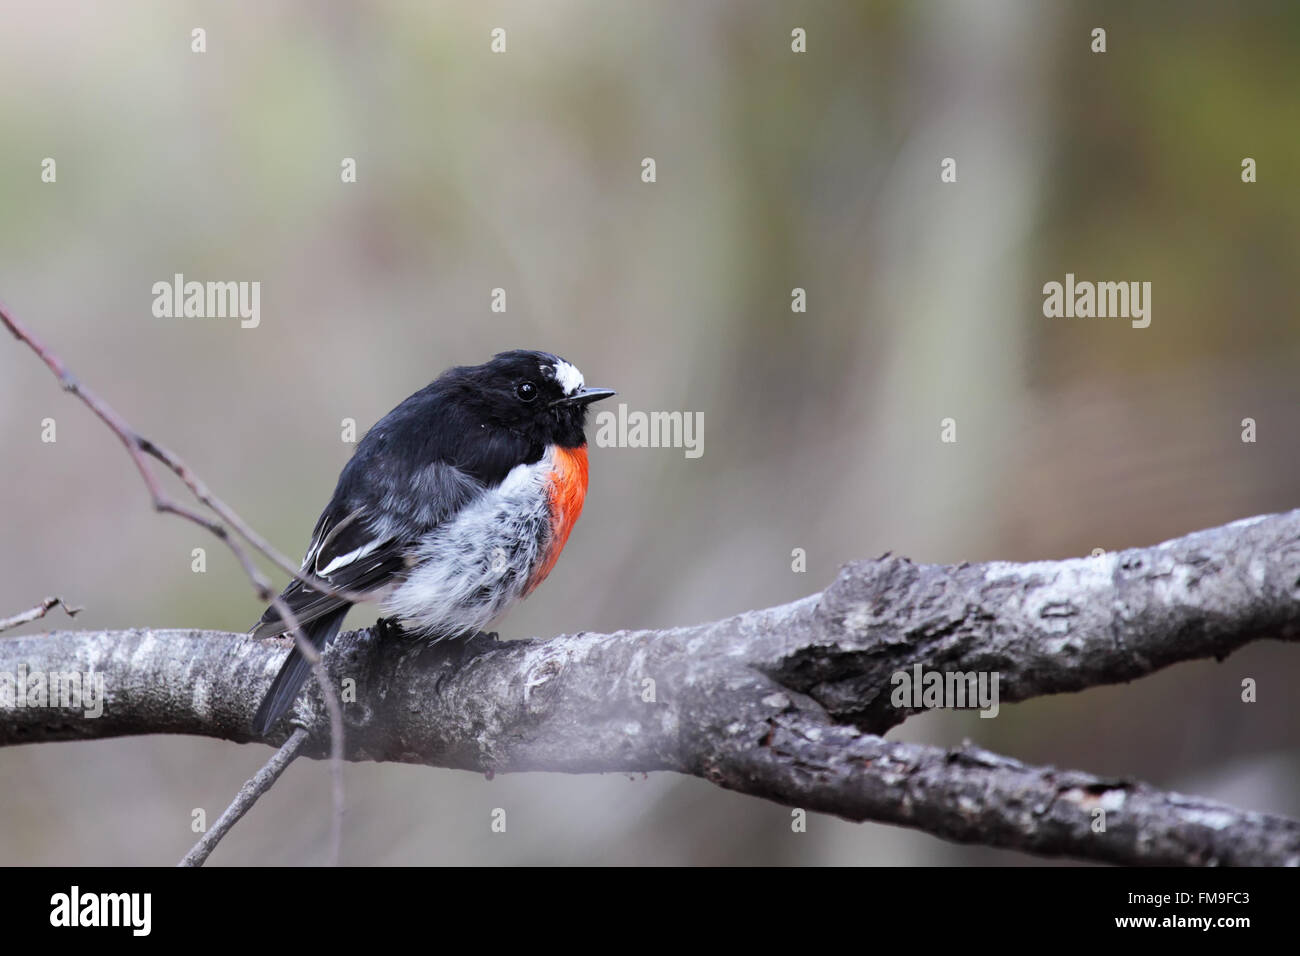 Scarlet Robin (Petroica boodang) sitting on a branch in the Flinders Chase National Park on Kangaroo Island, South Australia, Au Stock Photo